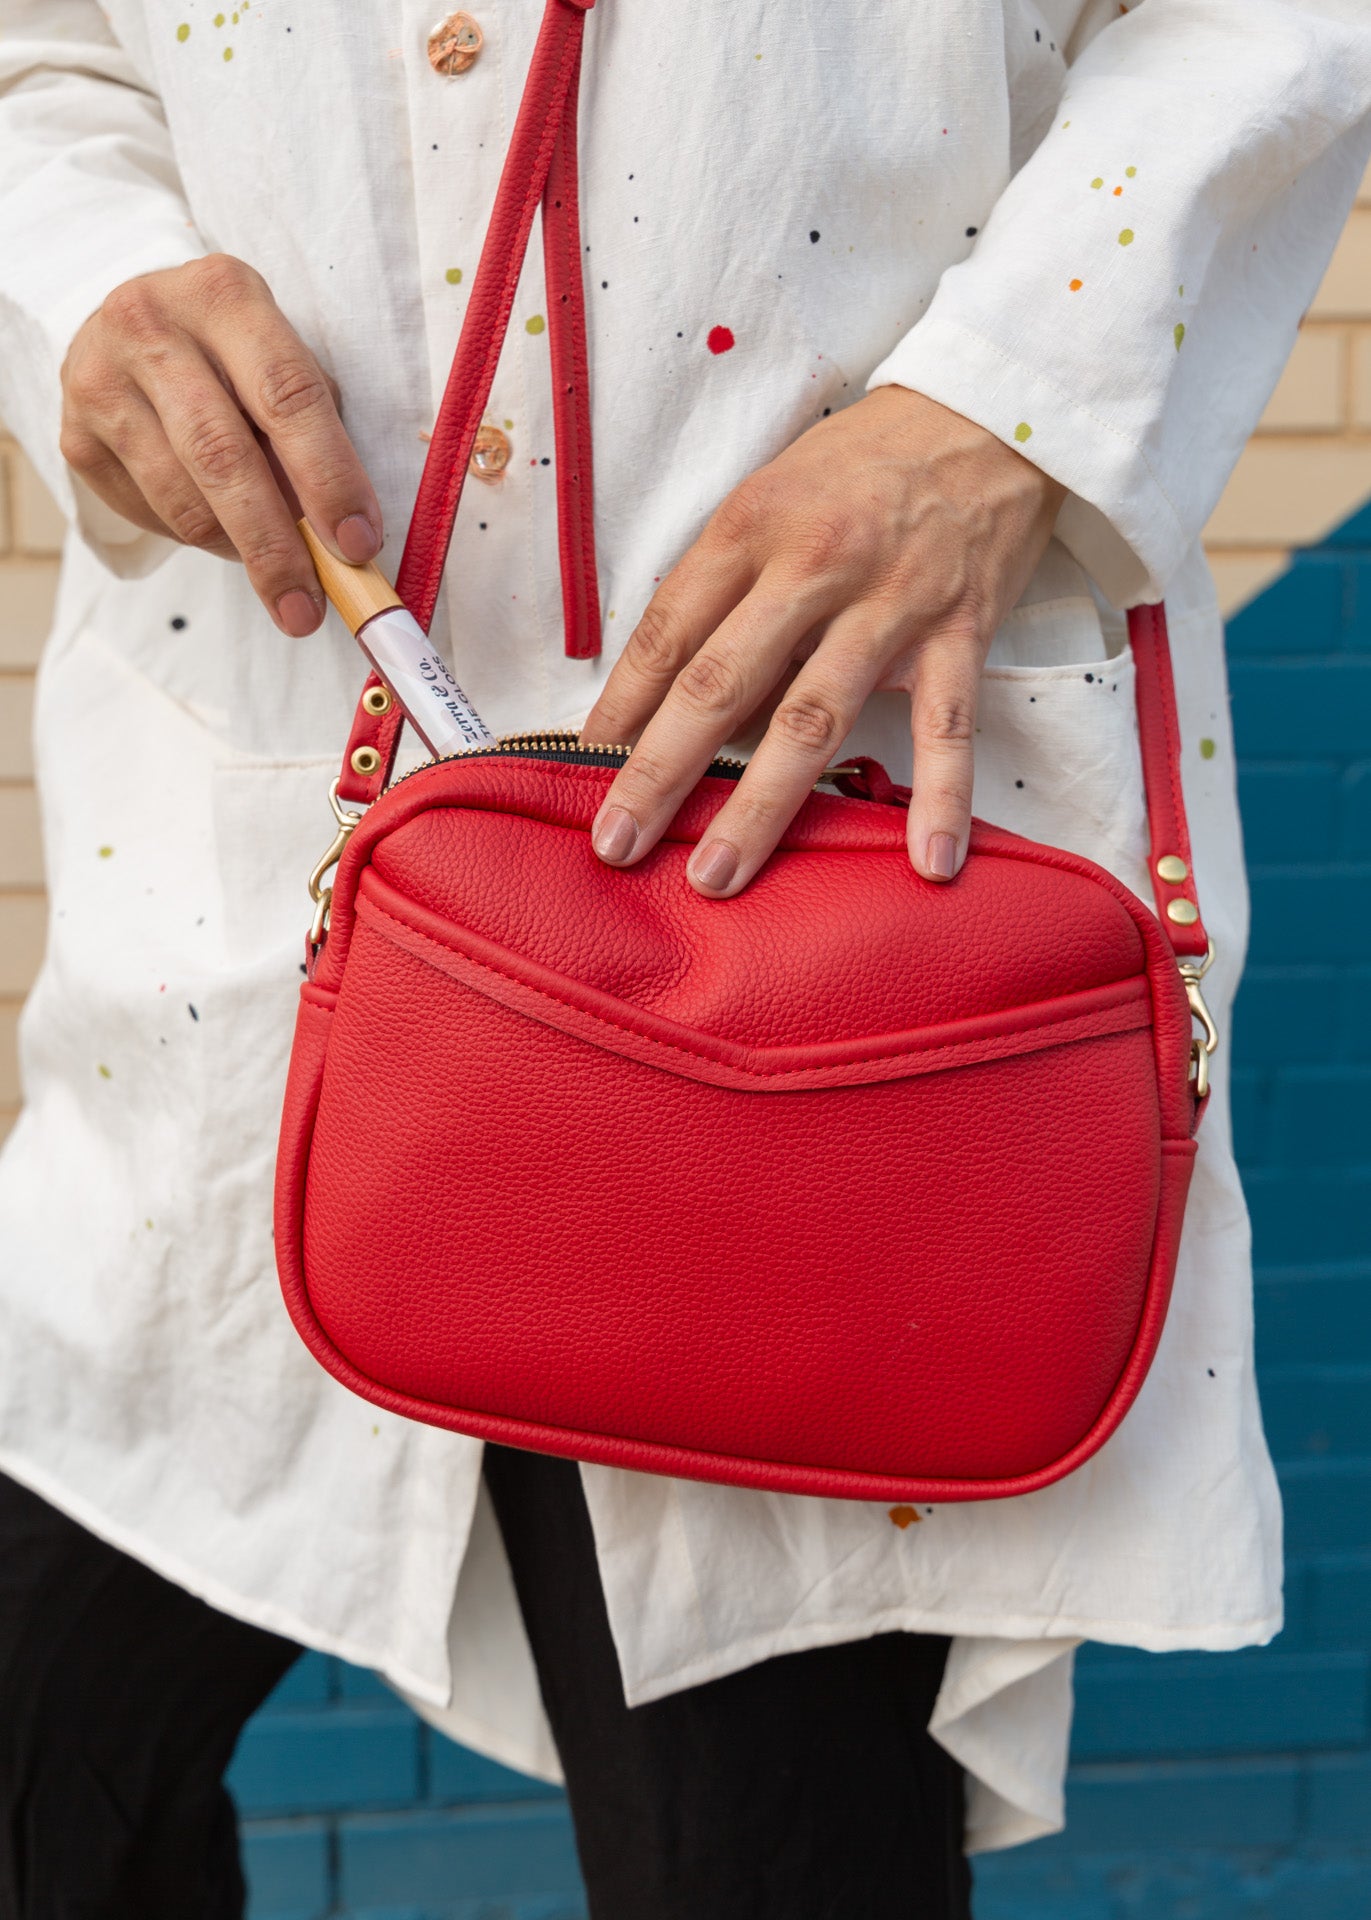 A woman holding a vivid red, cherry-colored cube-shaped bag, putting a zerra &amp; co lipgloss into the crossbody, shoulder bag